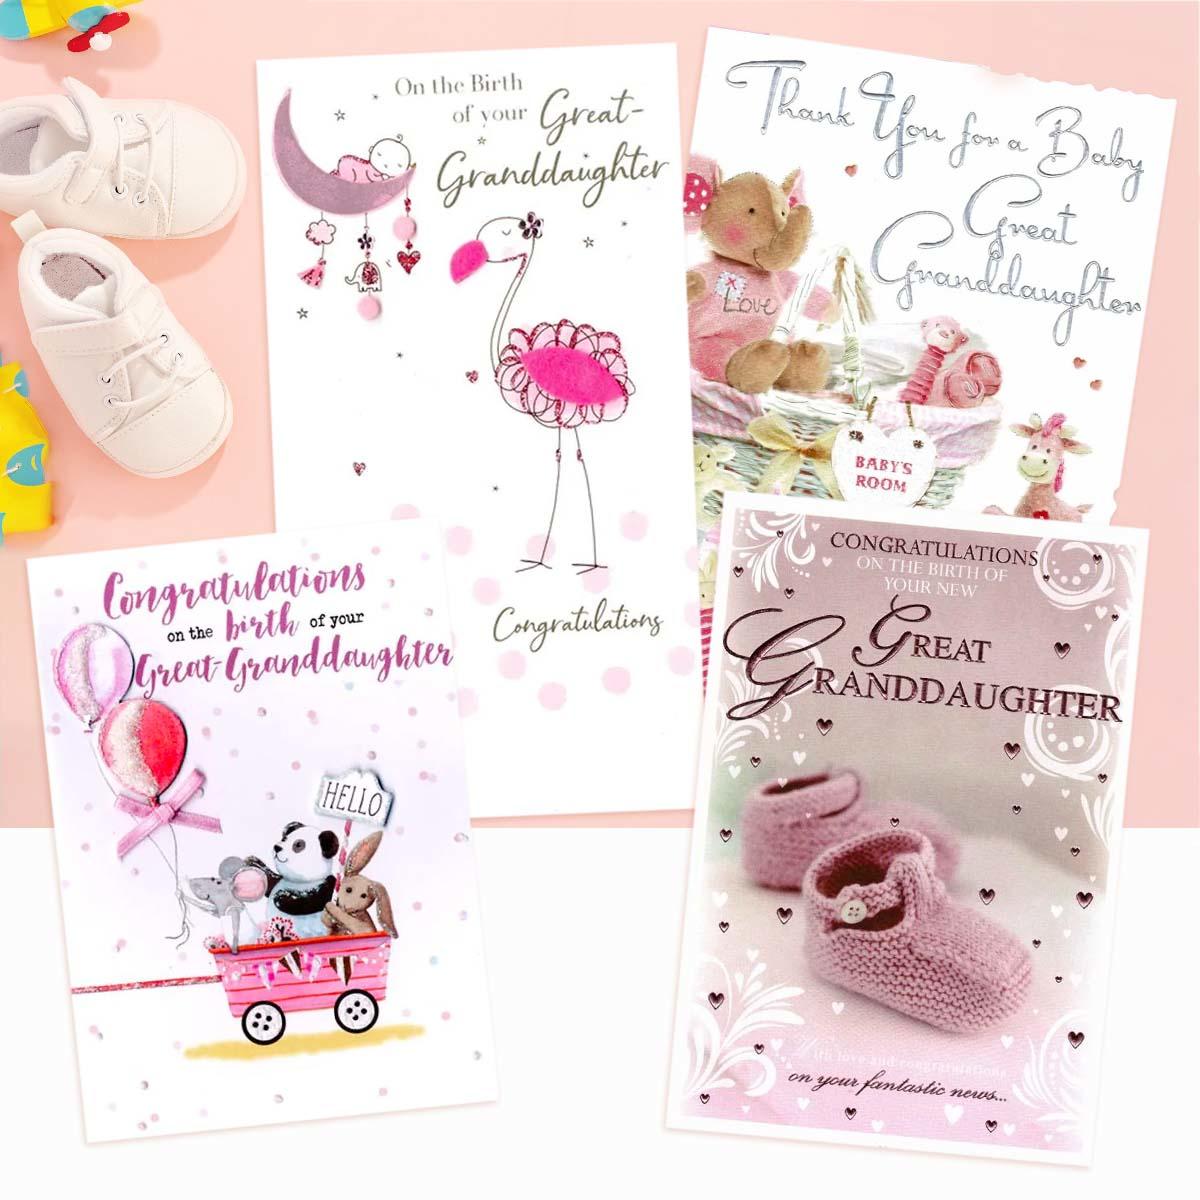 A Selection Of Cards To Show The Depth Of Range In Our Baby Great Granddaughter Cards Section